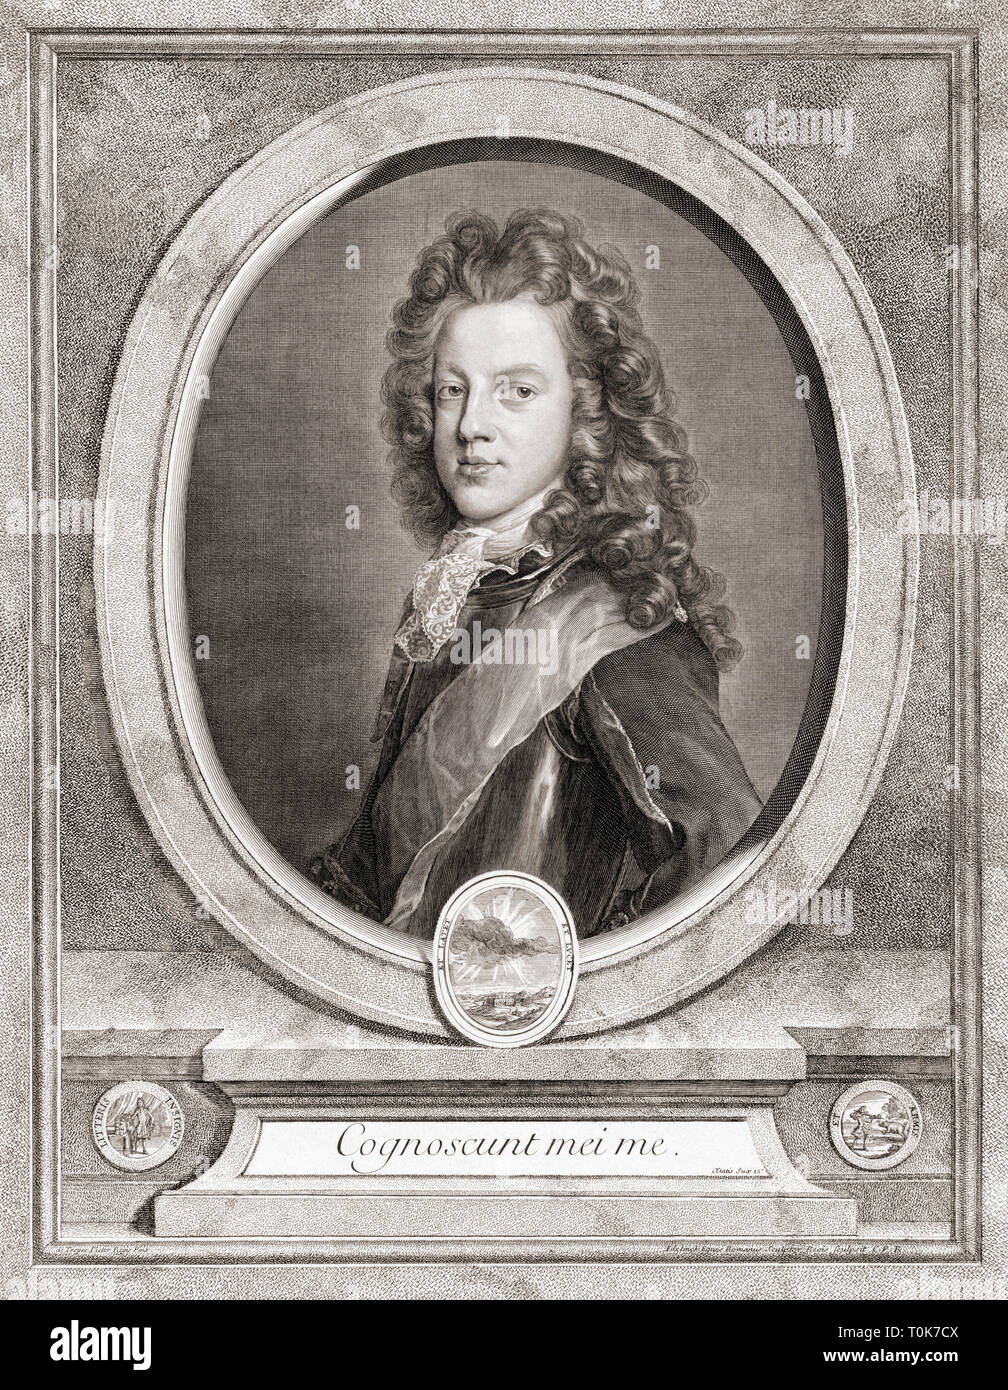 James Francis Edward Stuart, 1688 - 1766.   Pretender to the English, Irish and Scottish crowns.  Known as The Old Pretender.  He was the father of  Charles Edward Stuart, Bonnie Prince Charlie, The Young Pretender. Stock Photo